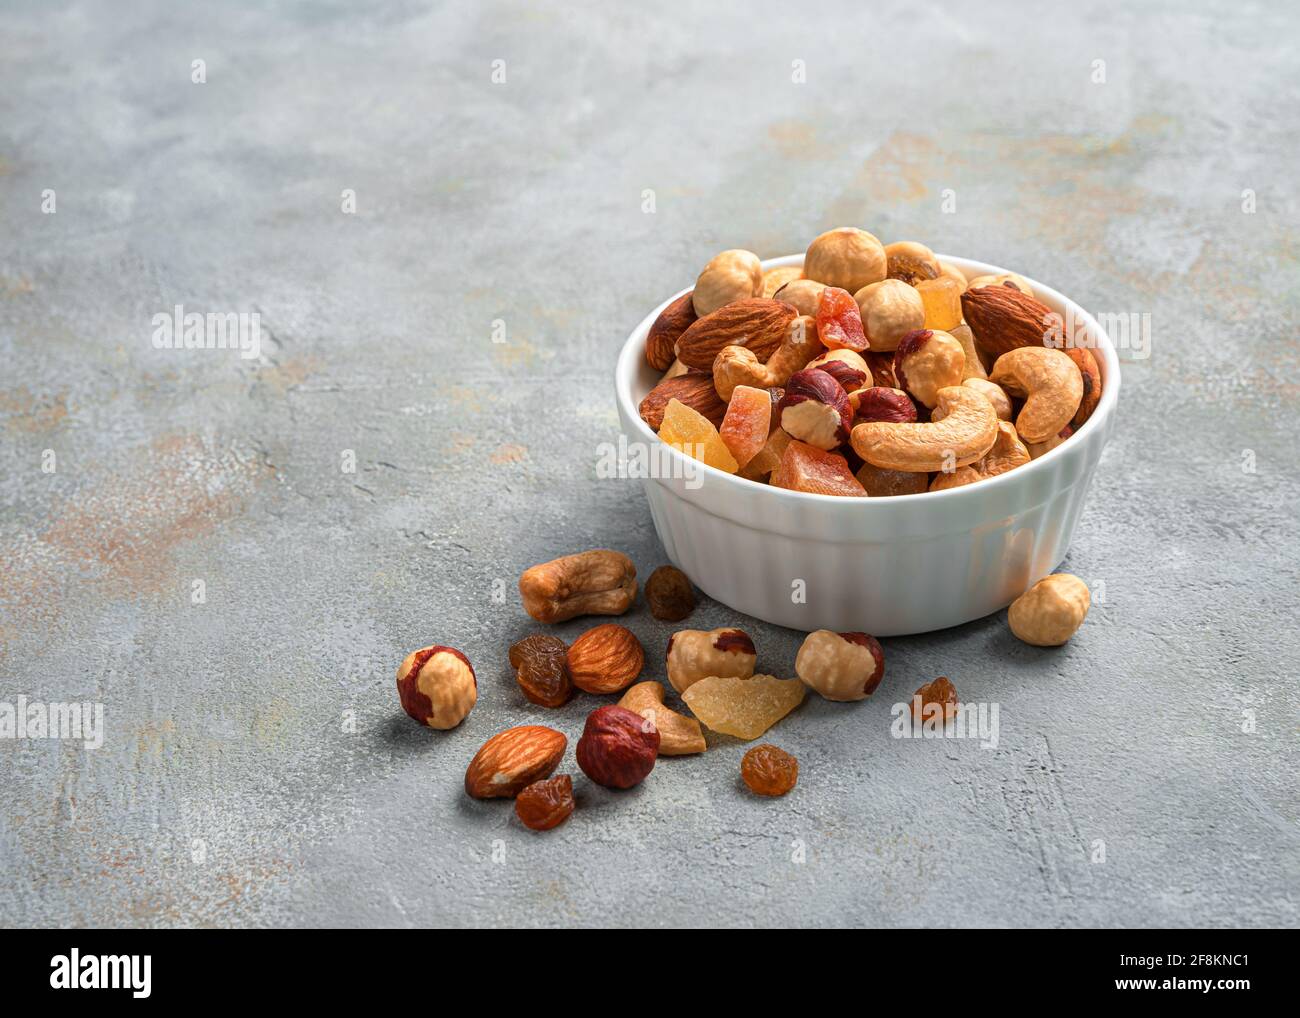 Healthy snack: a mixture of dried fruits and different types of nuts on a gray background. Side view, close-up, copy space. Stock Photo